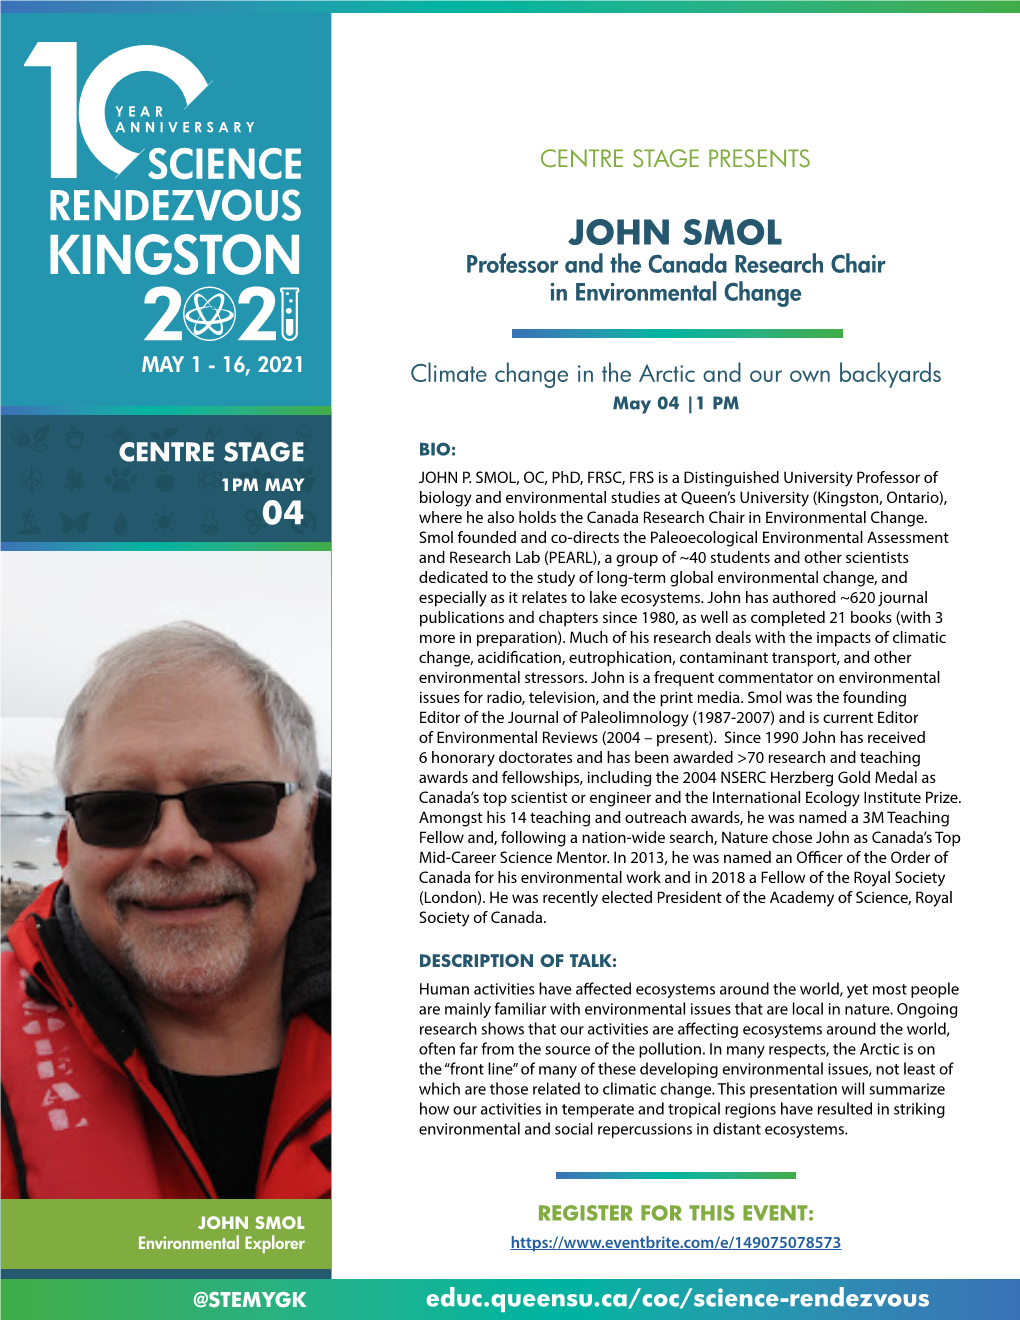 JOHN SMOL Professor and the Canada Research Chair in Environmental Change